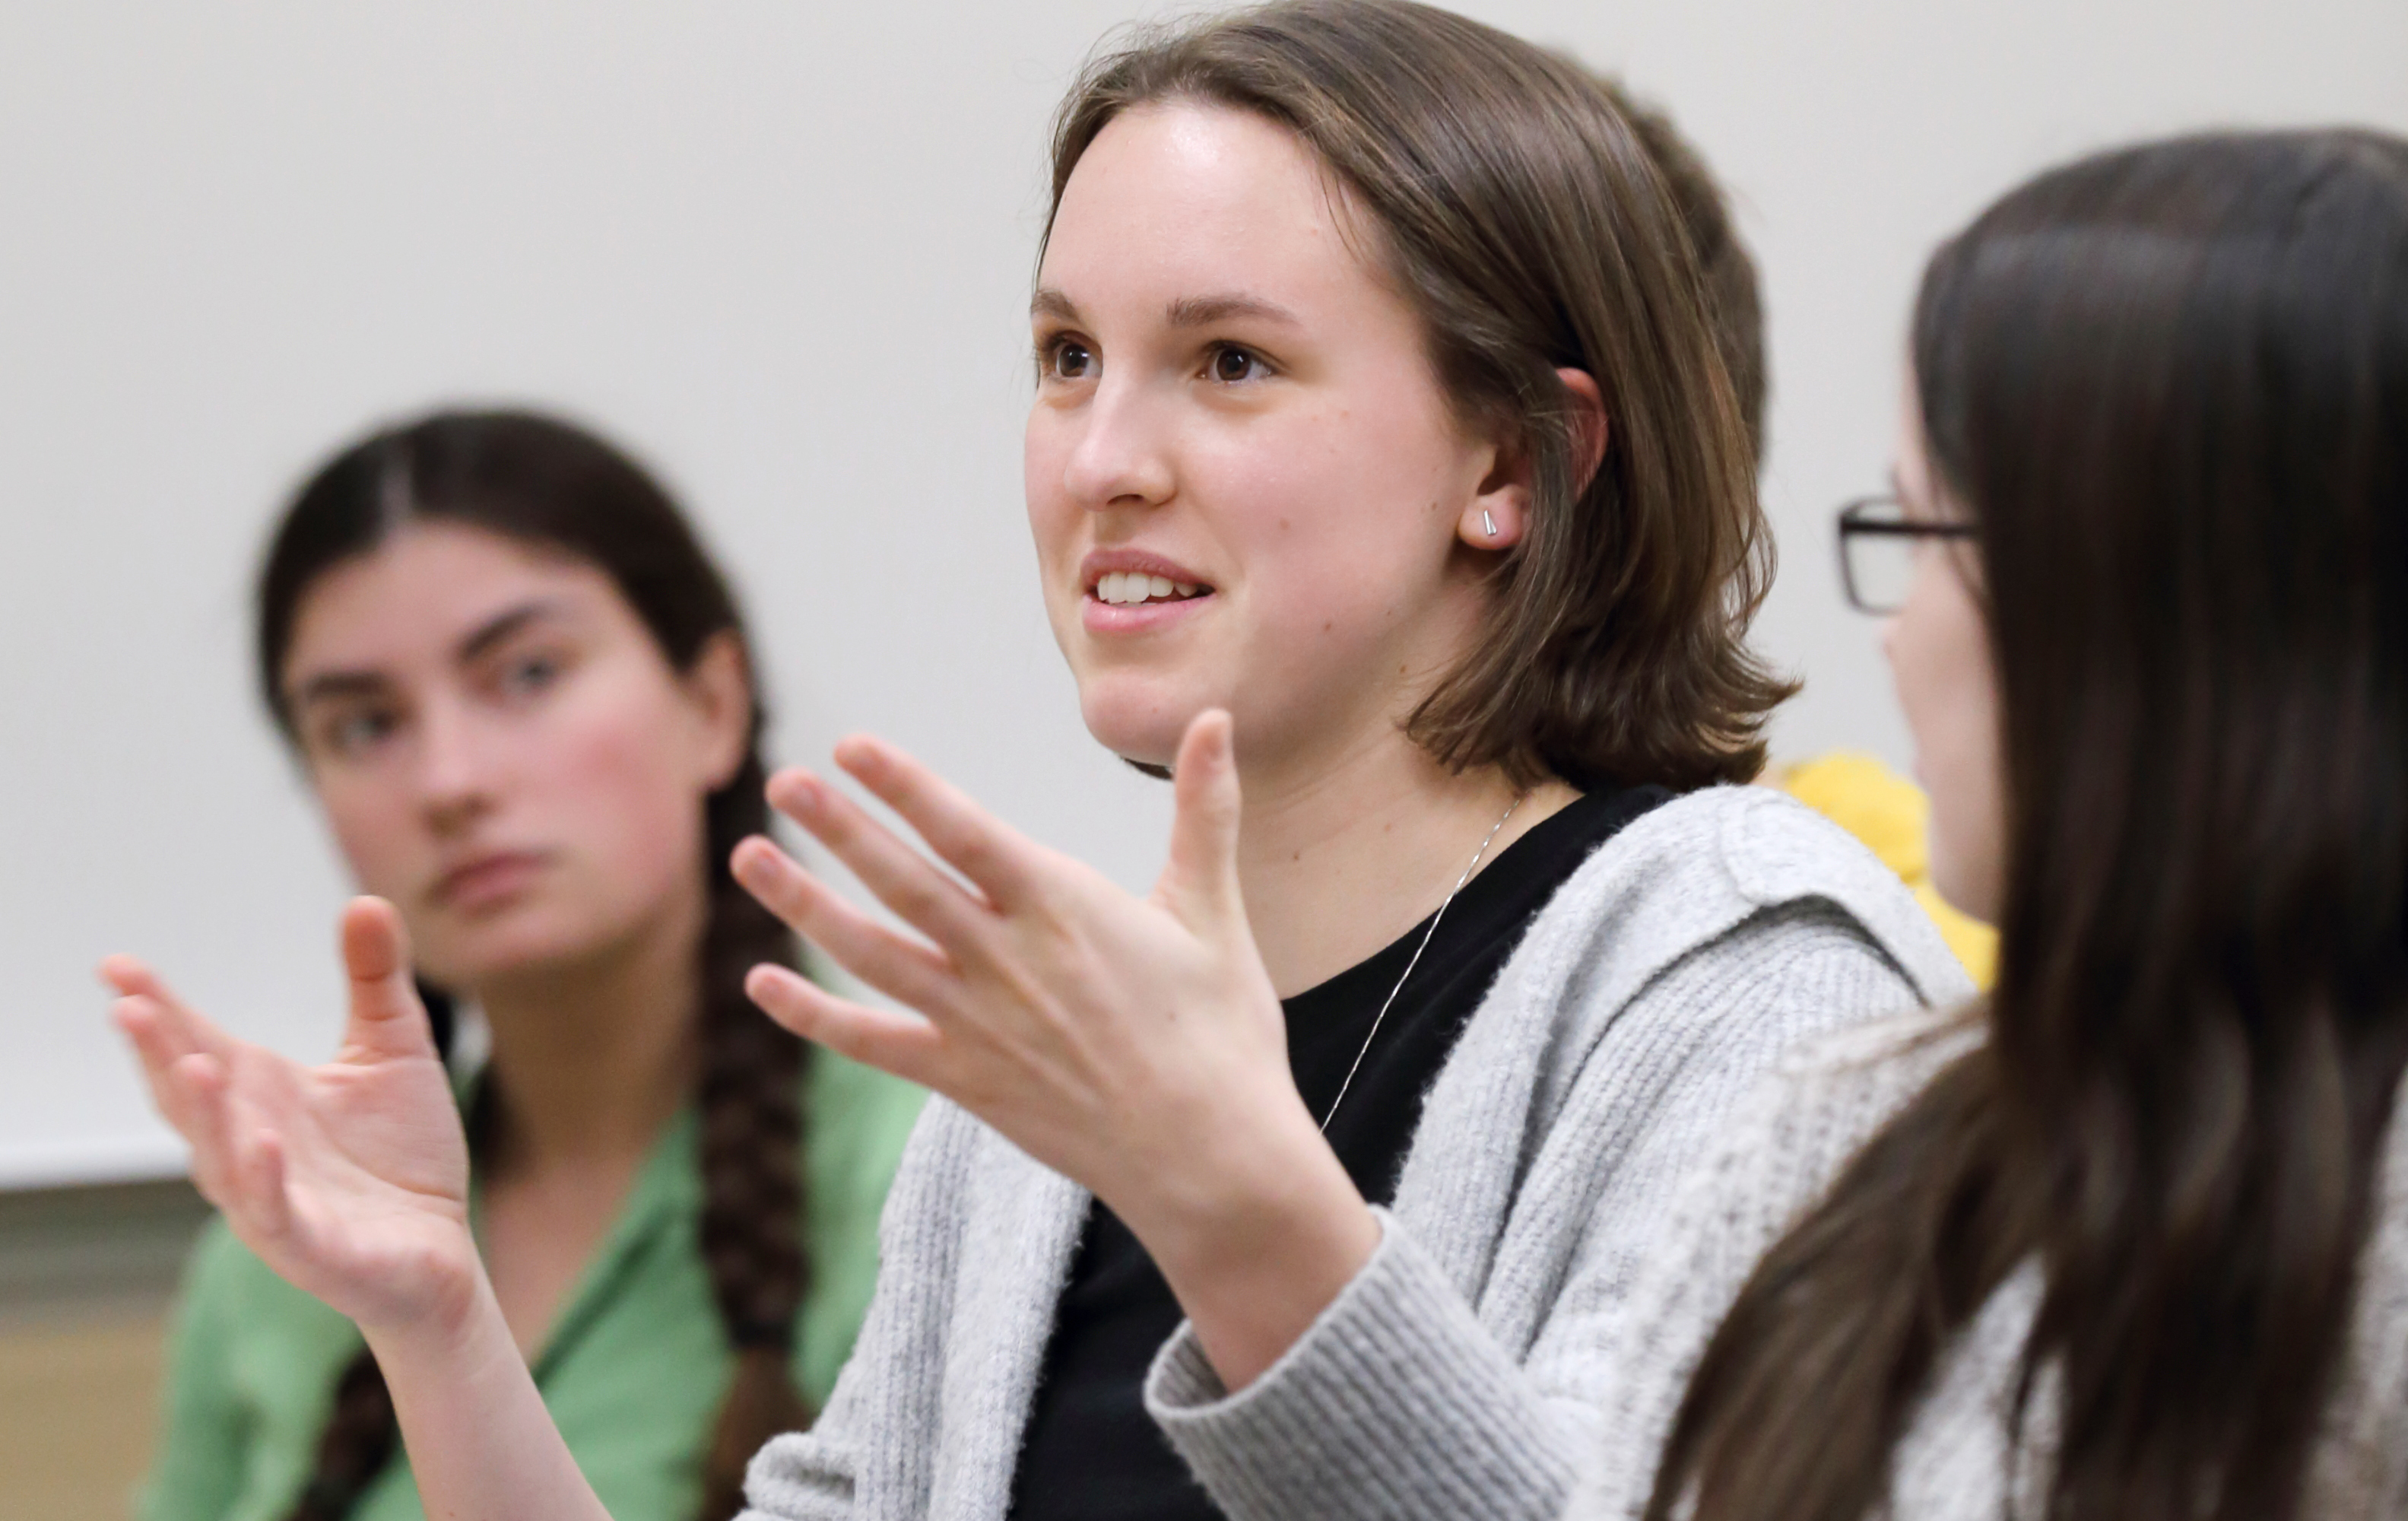 An image of Lauren speaking, gesturing with her hands, while classmates listen to her